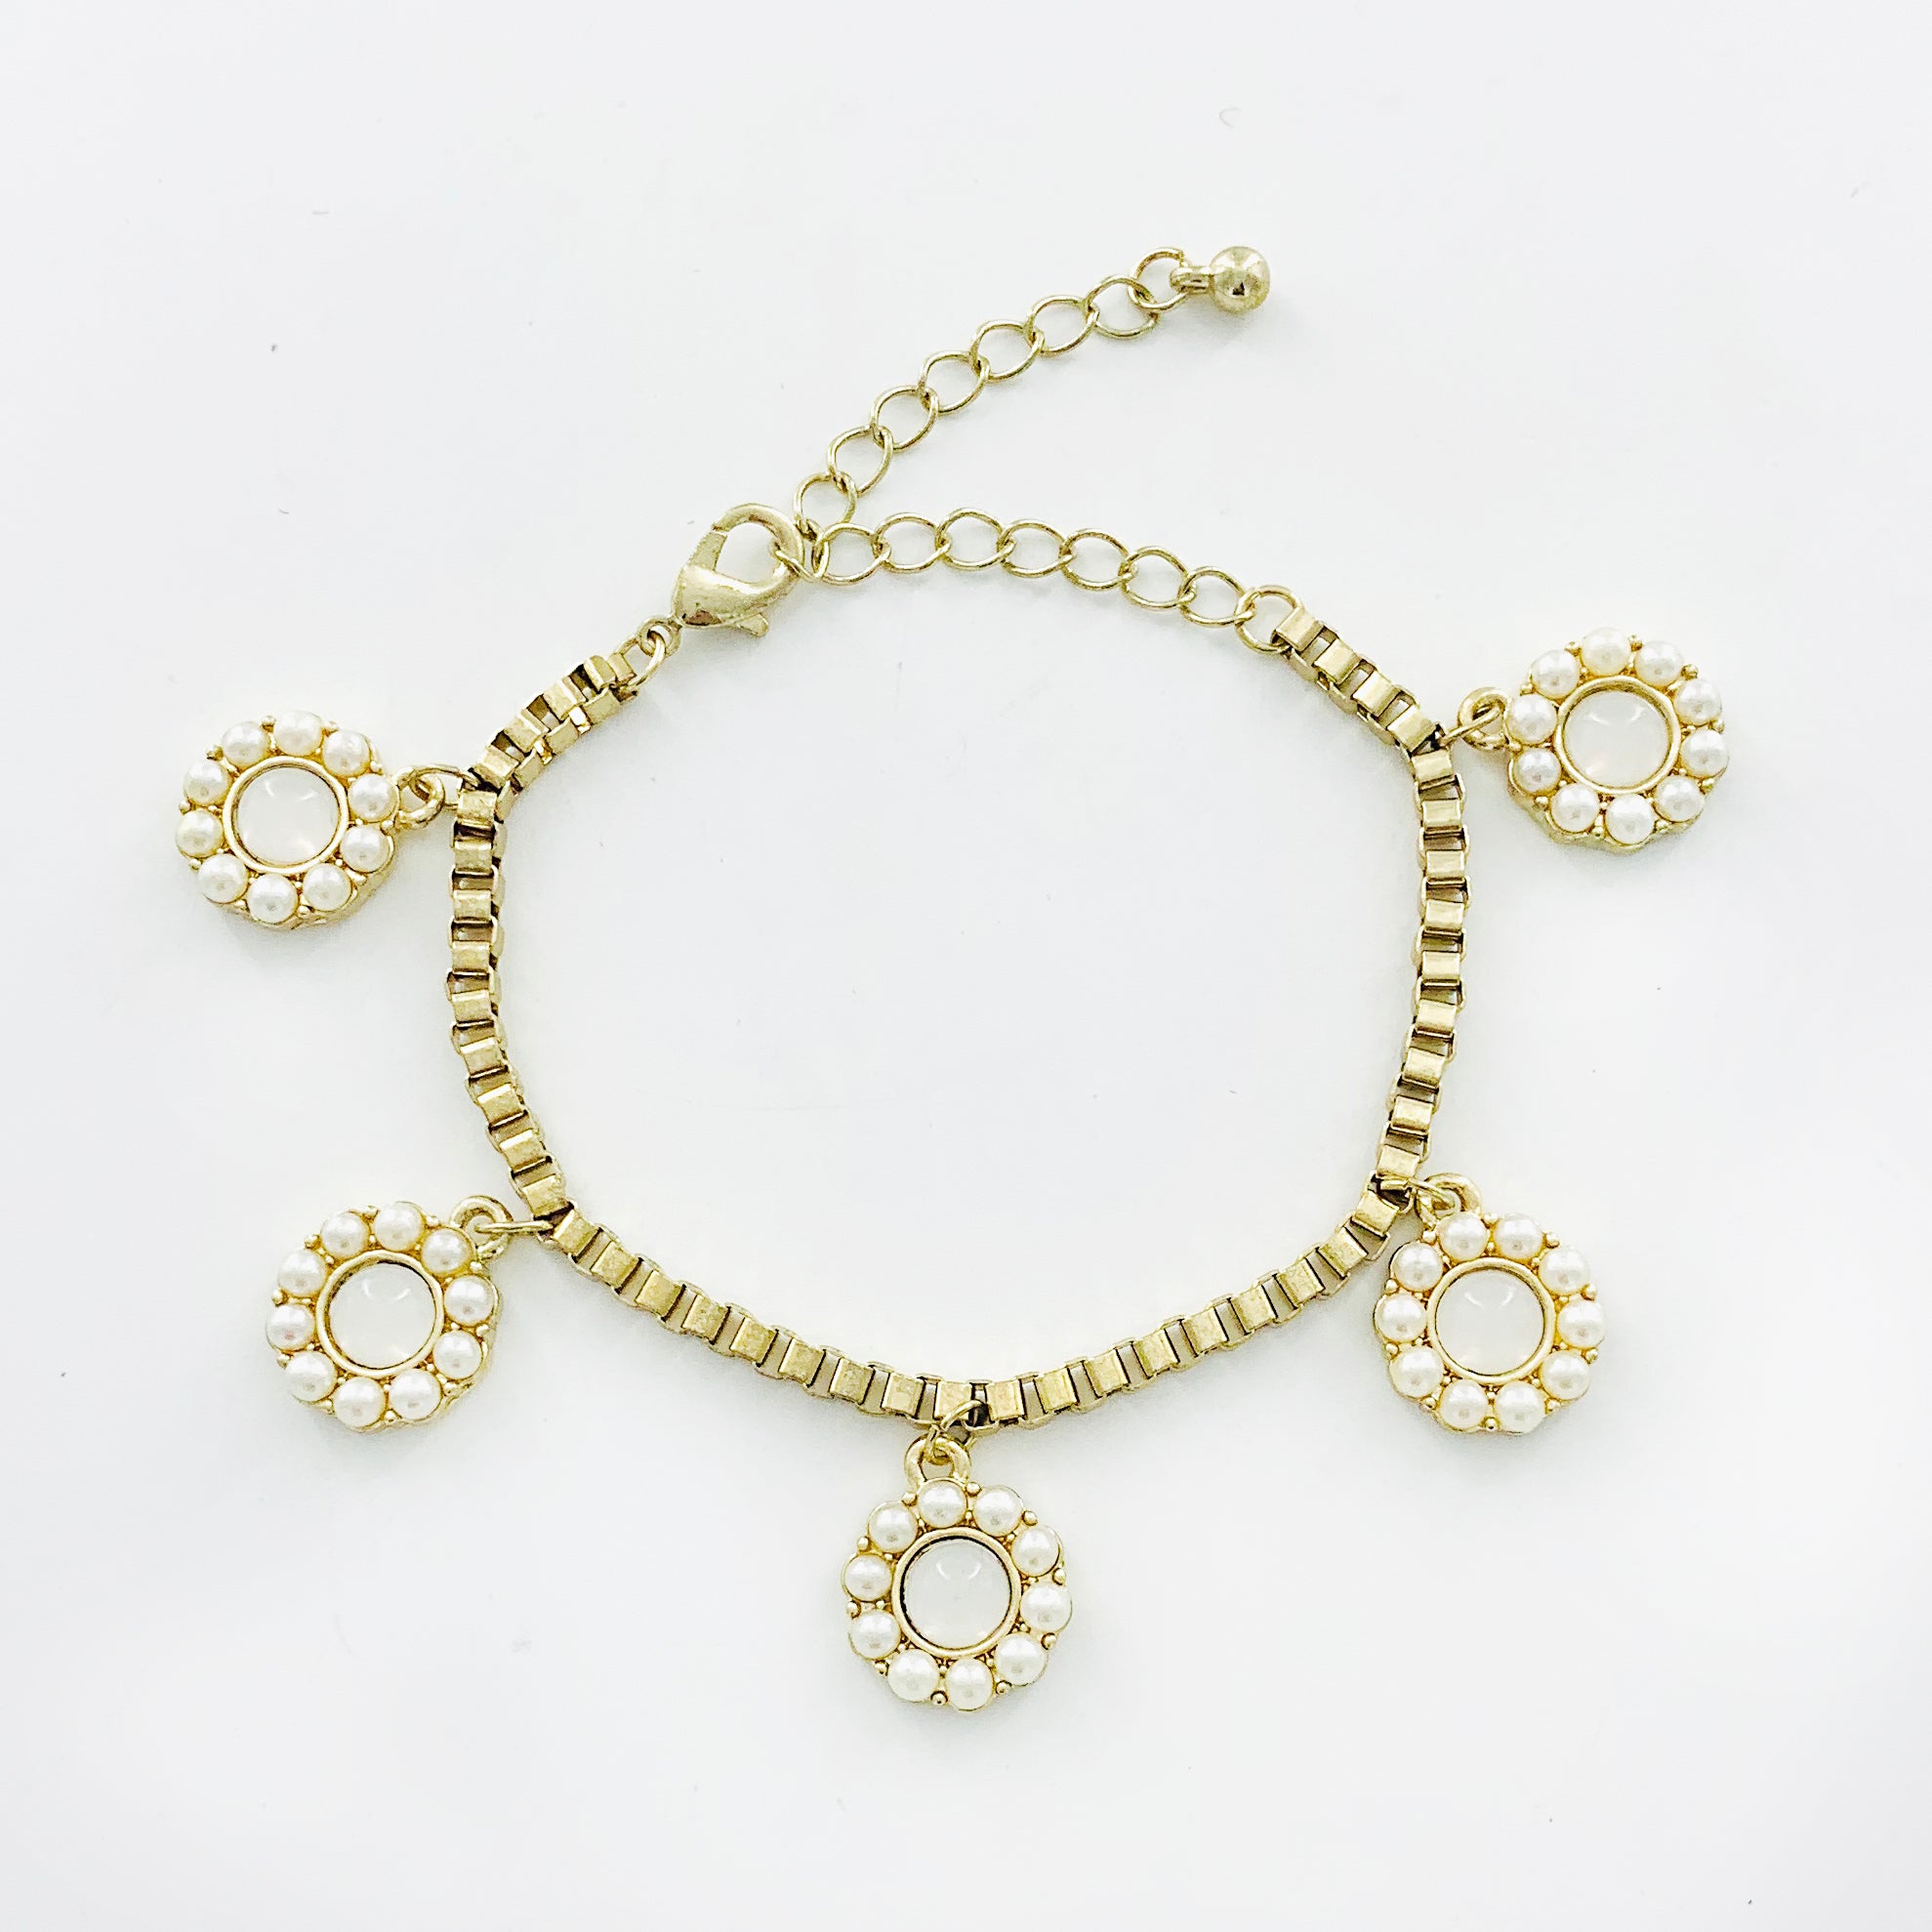 Gold chain with pearl flower dangling charms